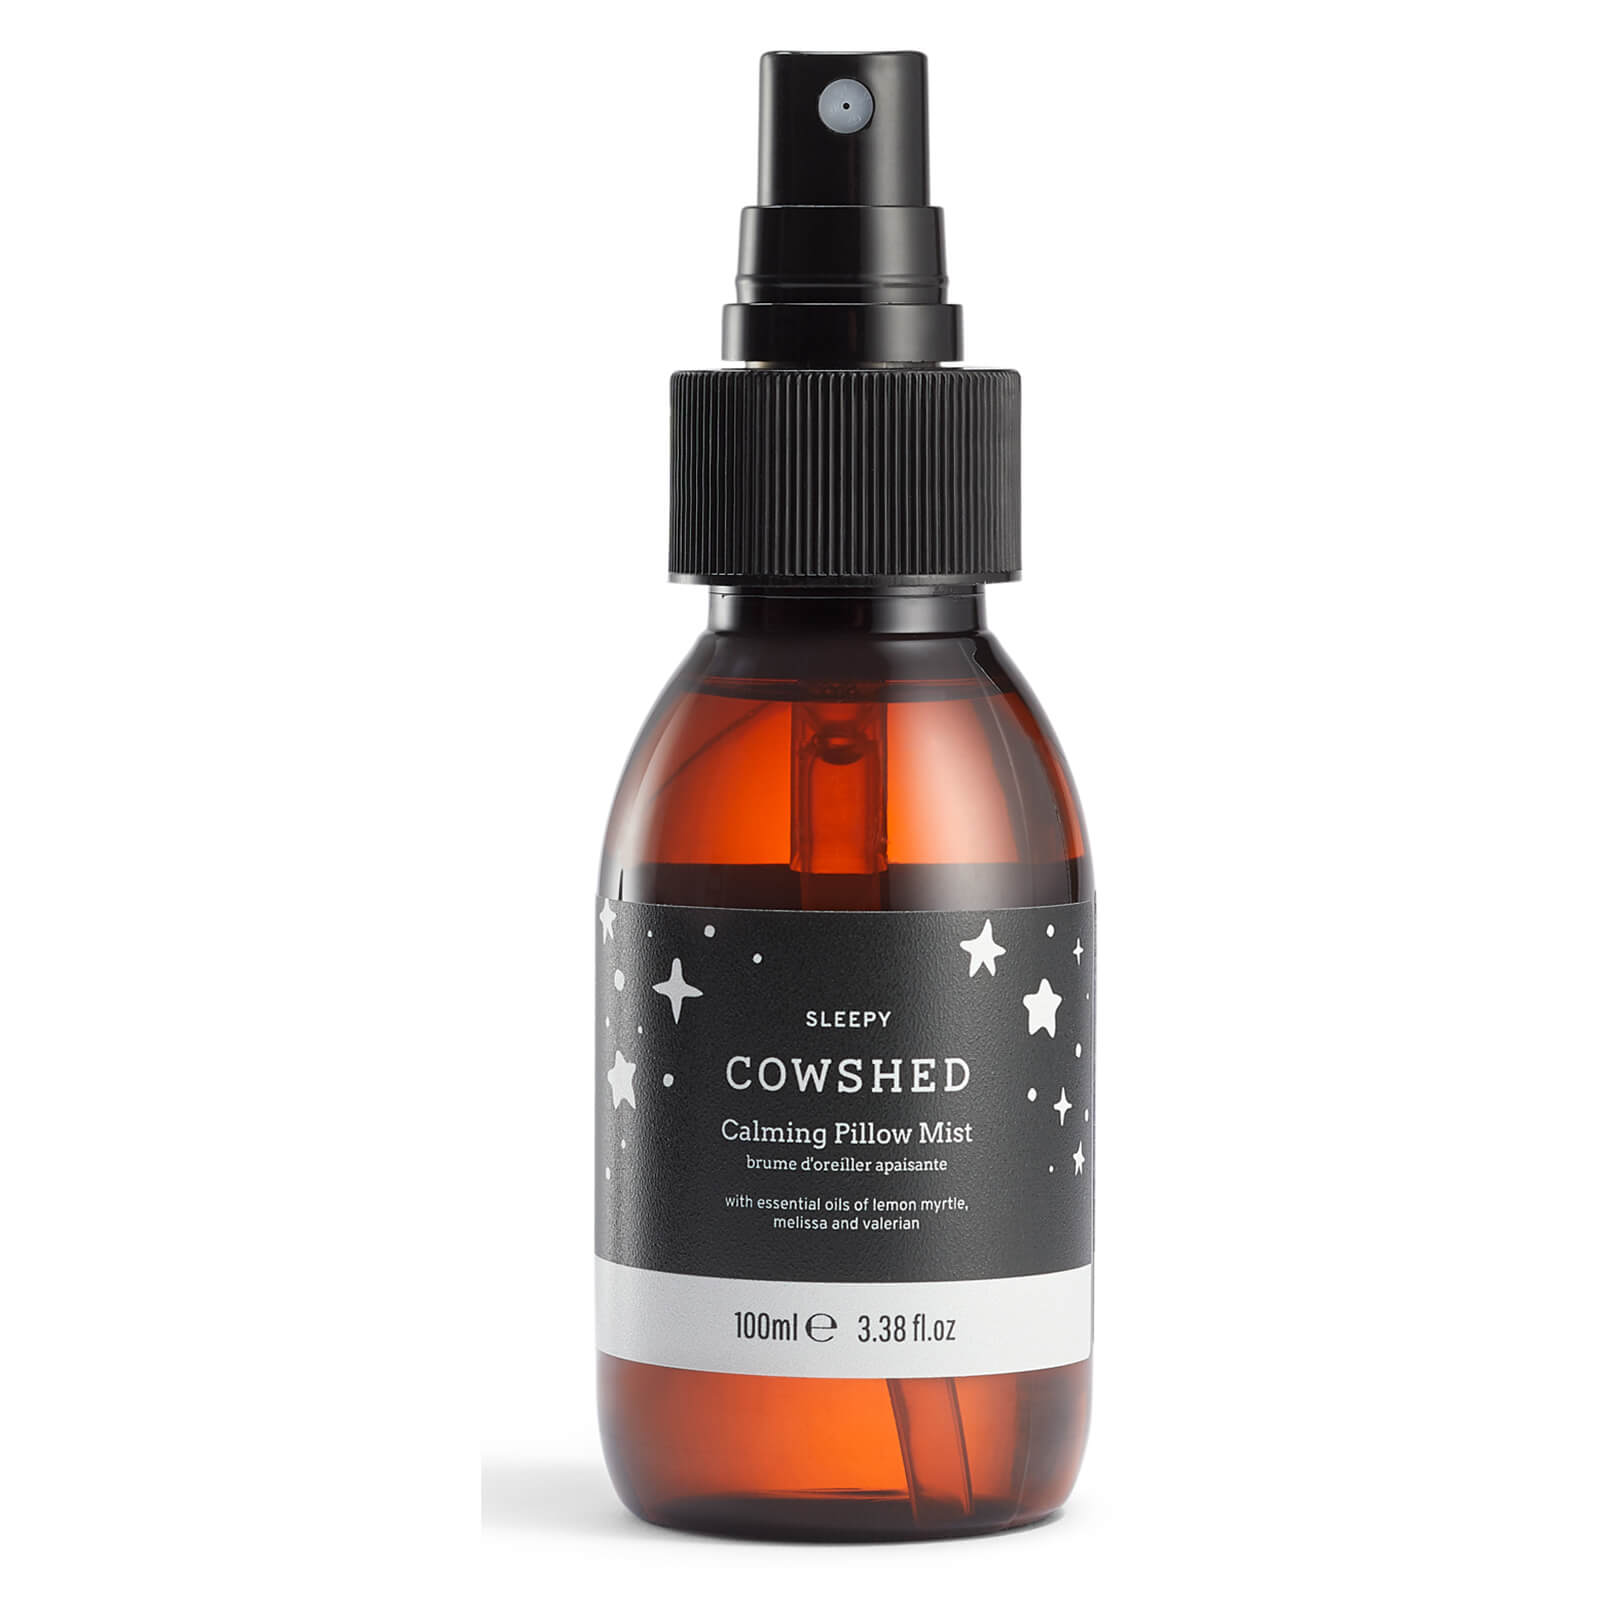 Cowshed SLEEP Calming Pillow Mist